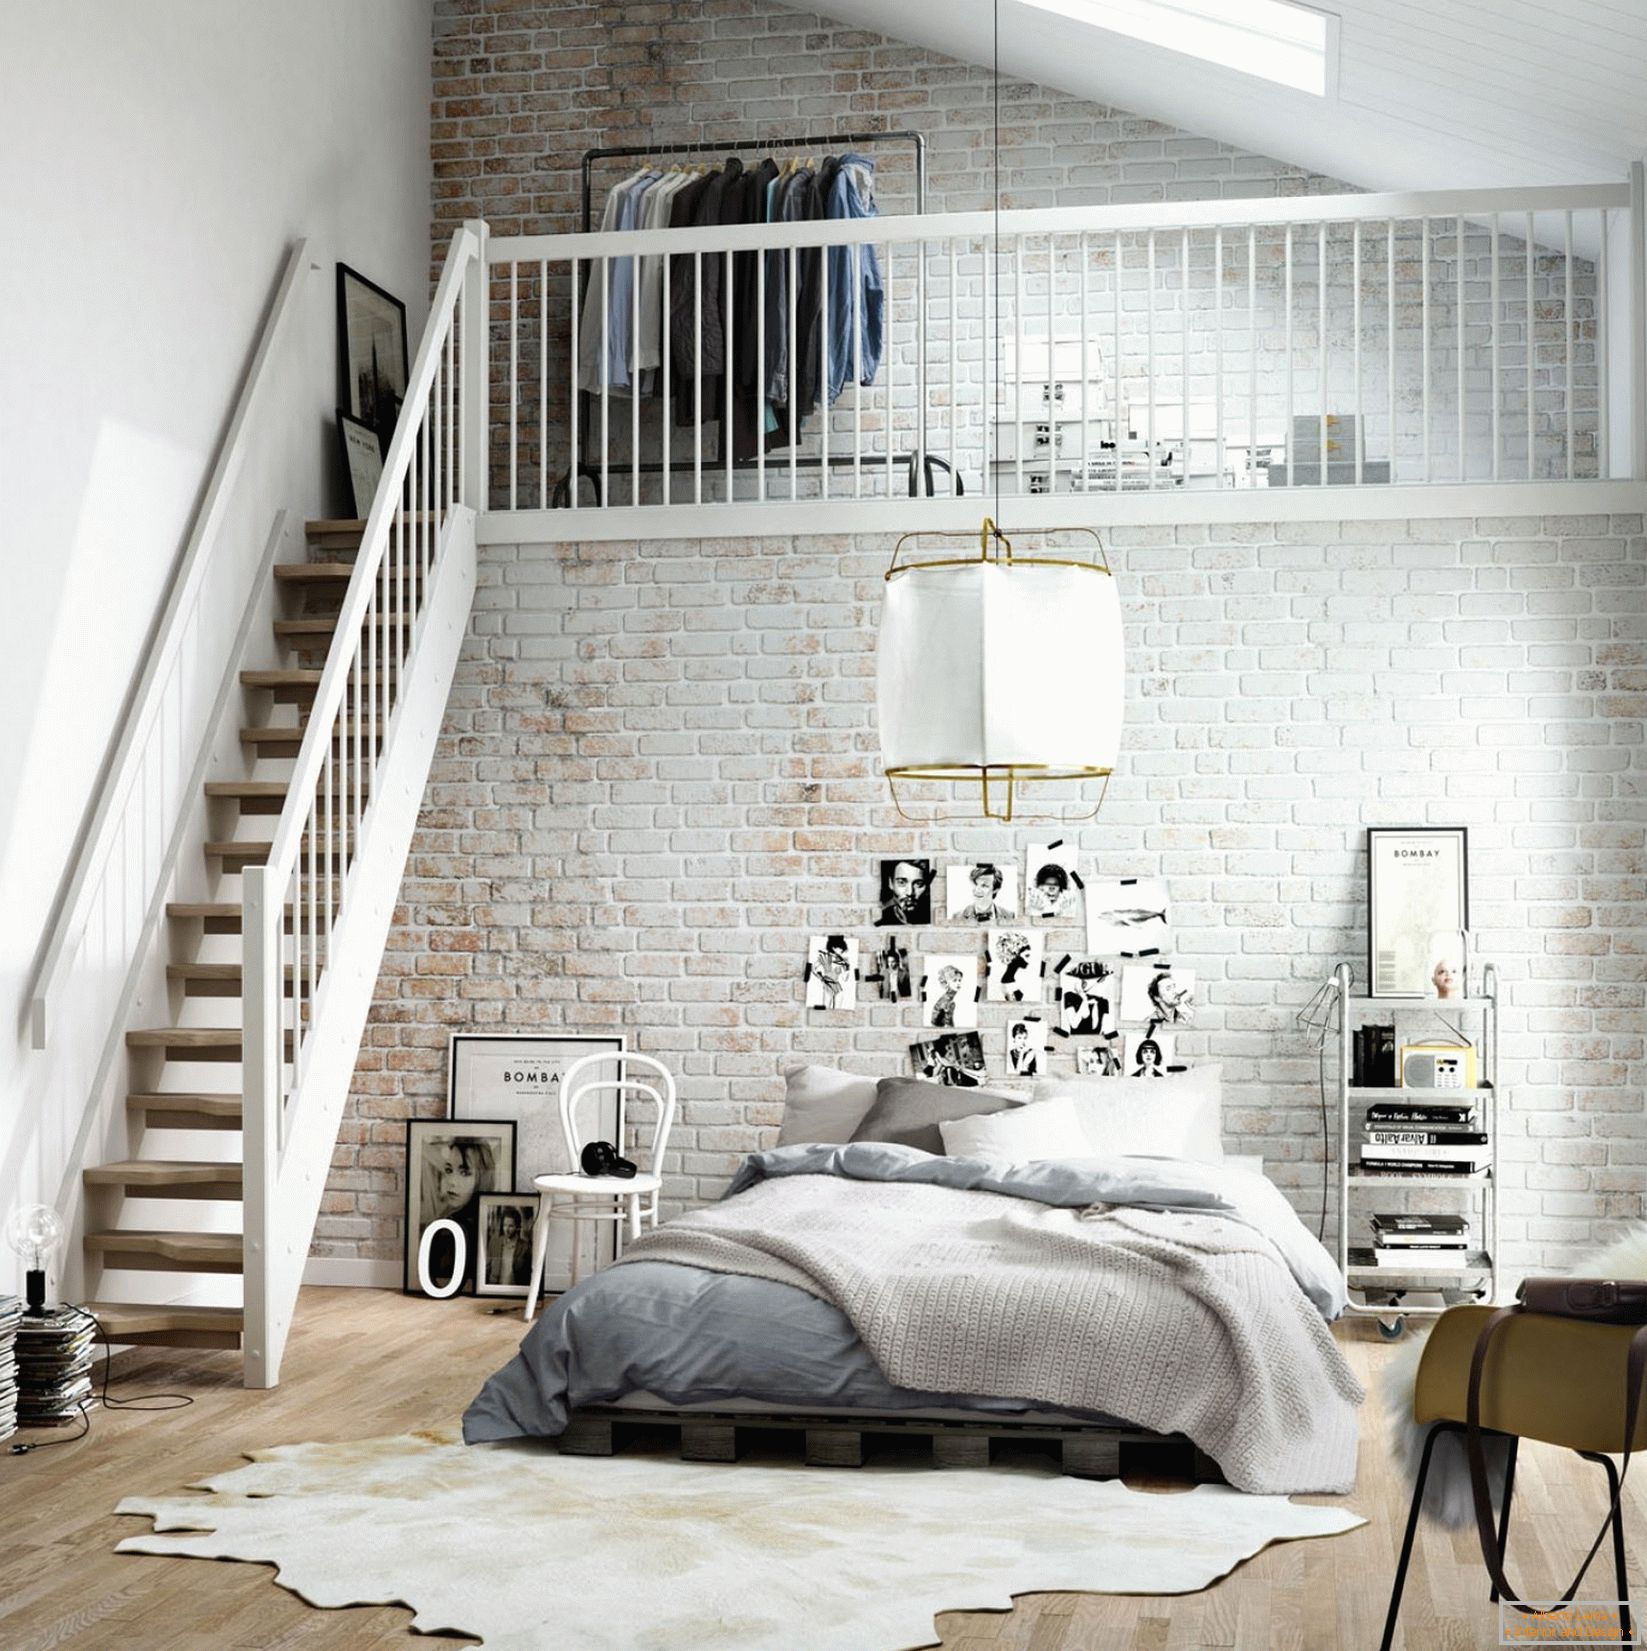 The choice of colors for a bedroom in Scandinavian style